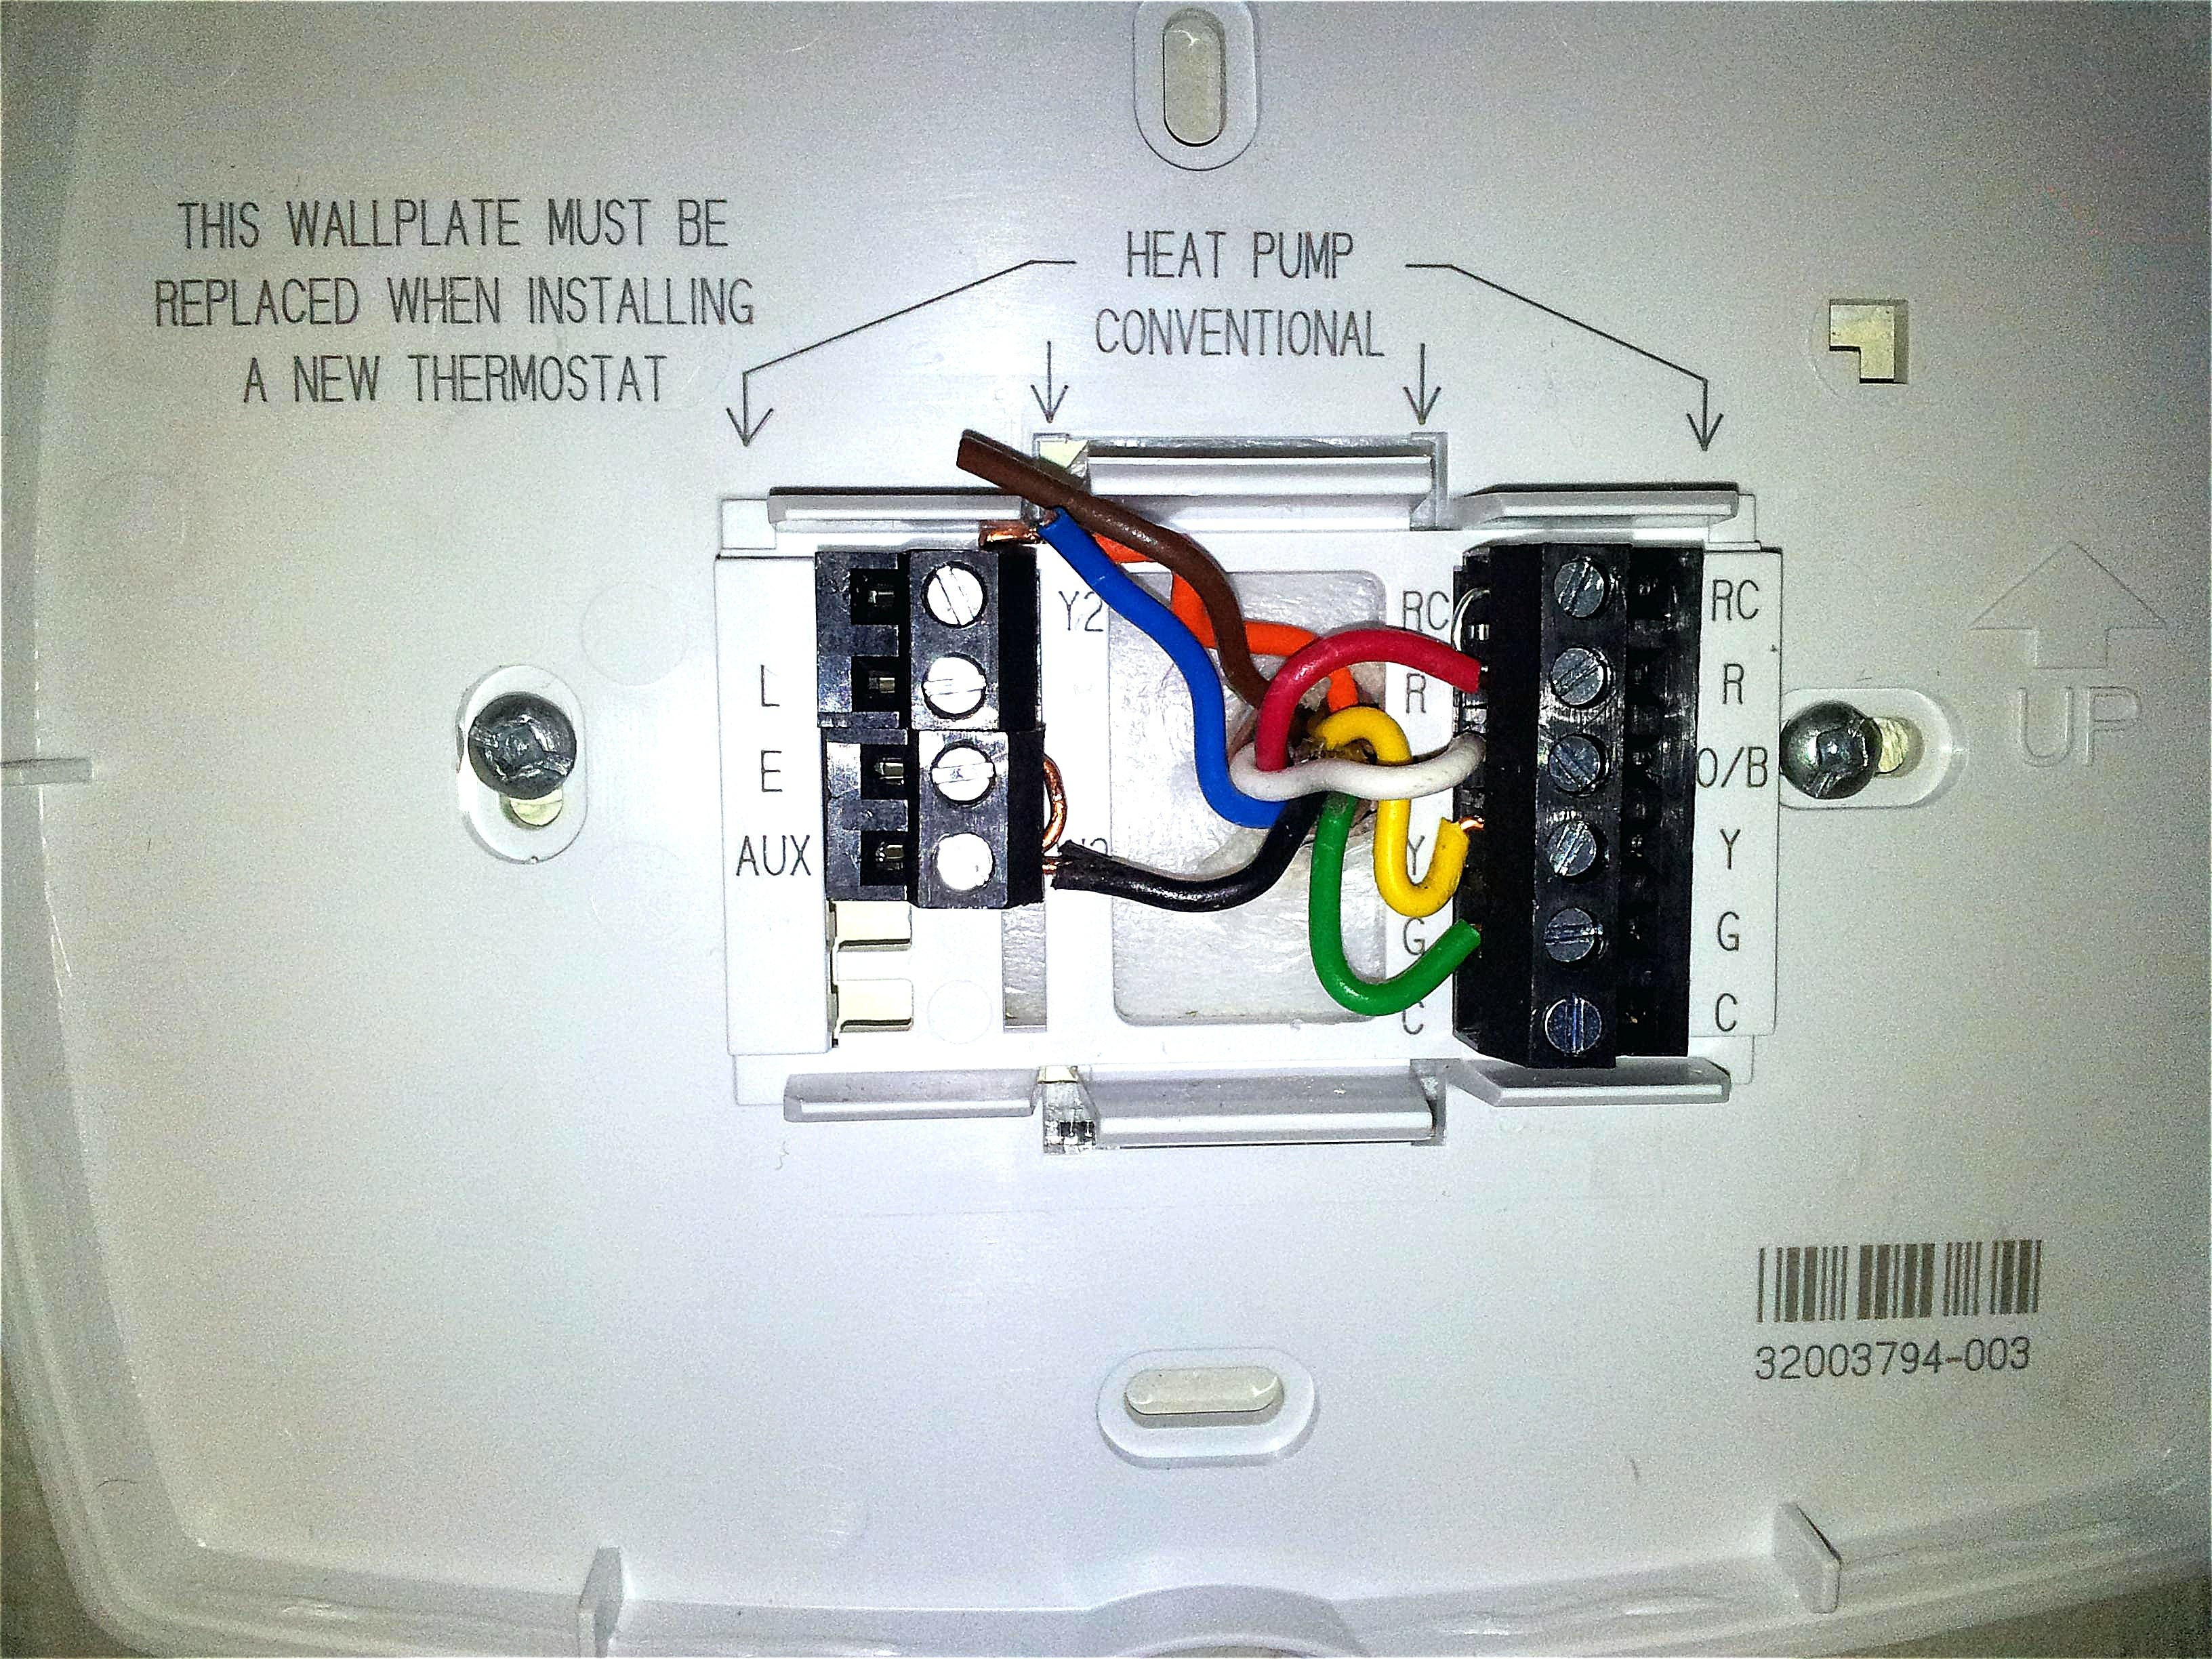 Dometic Thermostat Wiring Diagram Best Of Dometic Thermostat - Dometic Thermostat Wiring Diagram